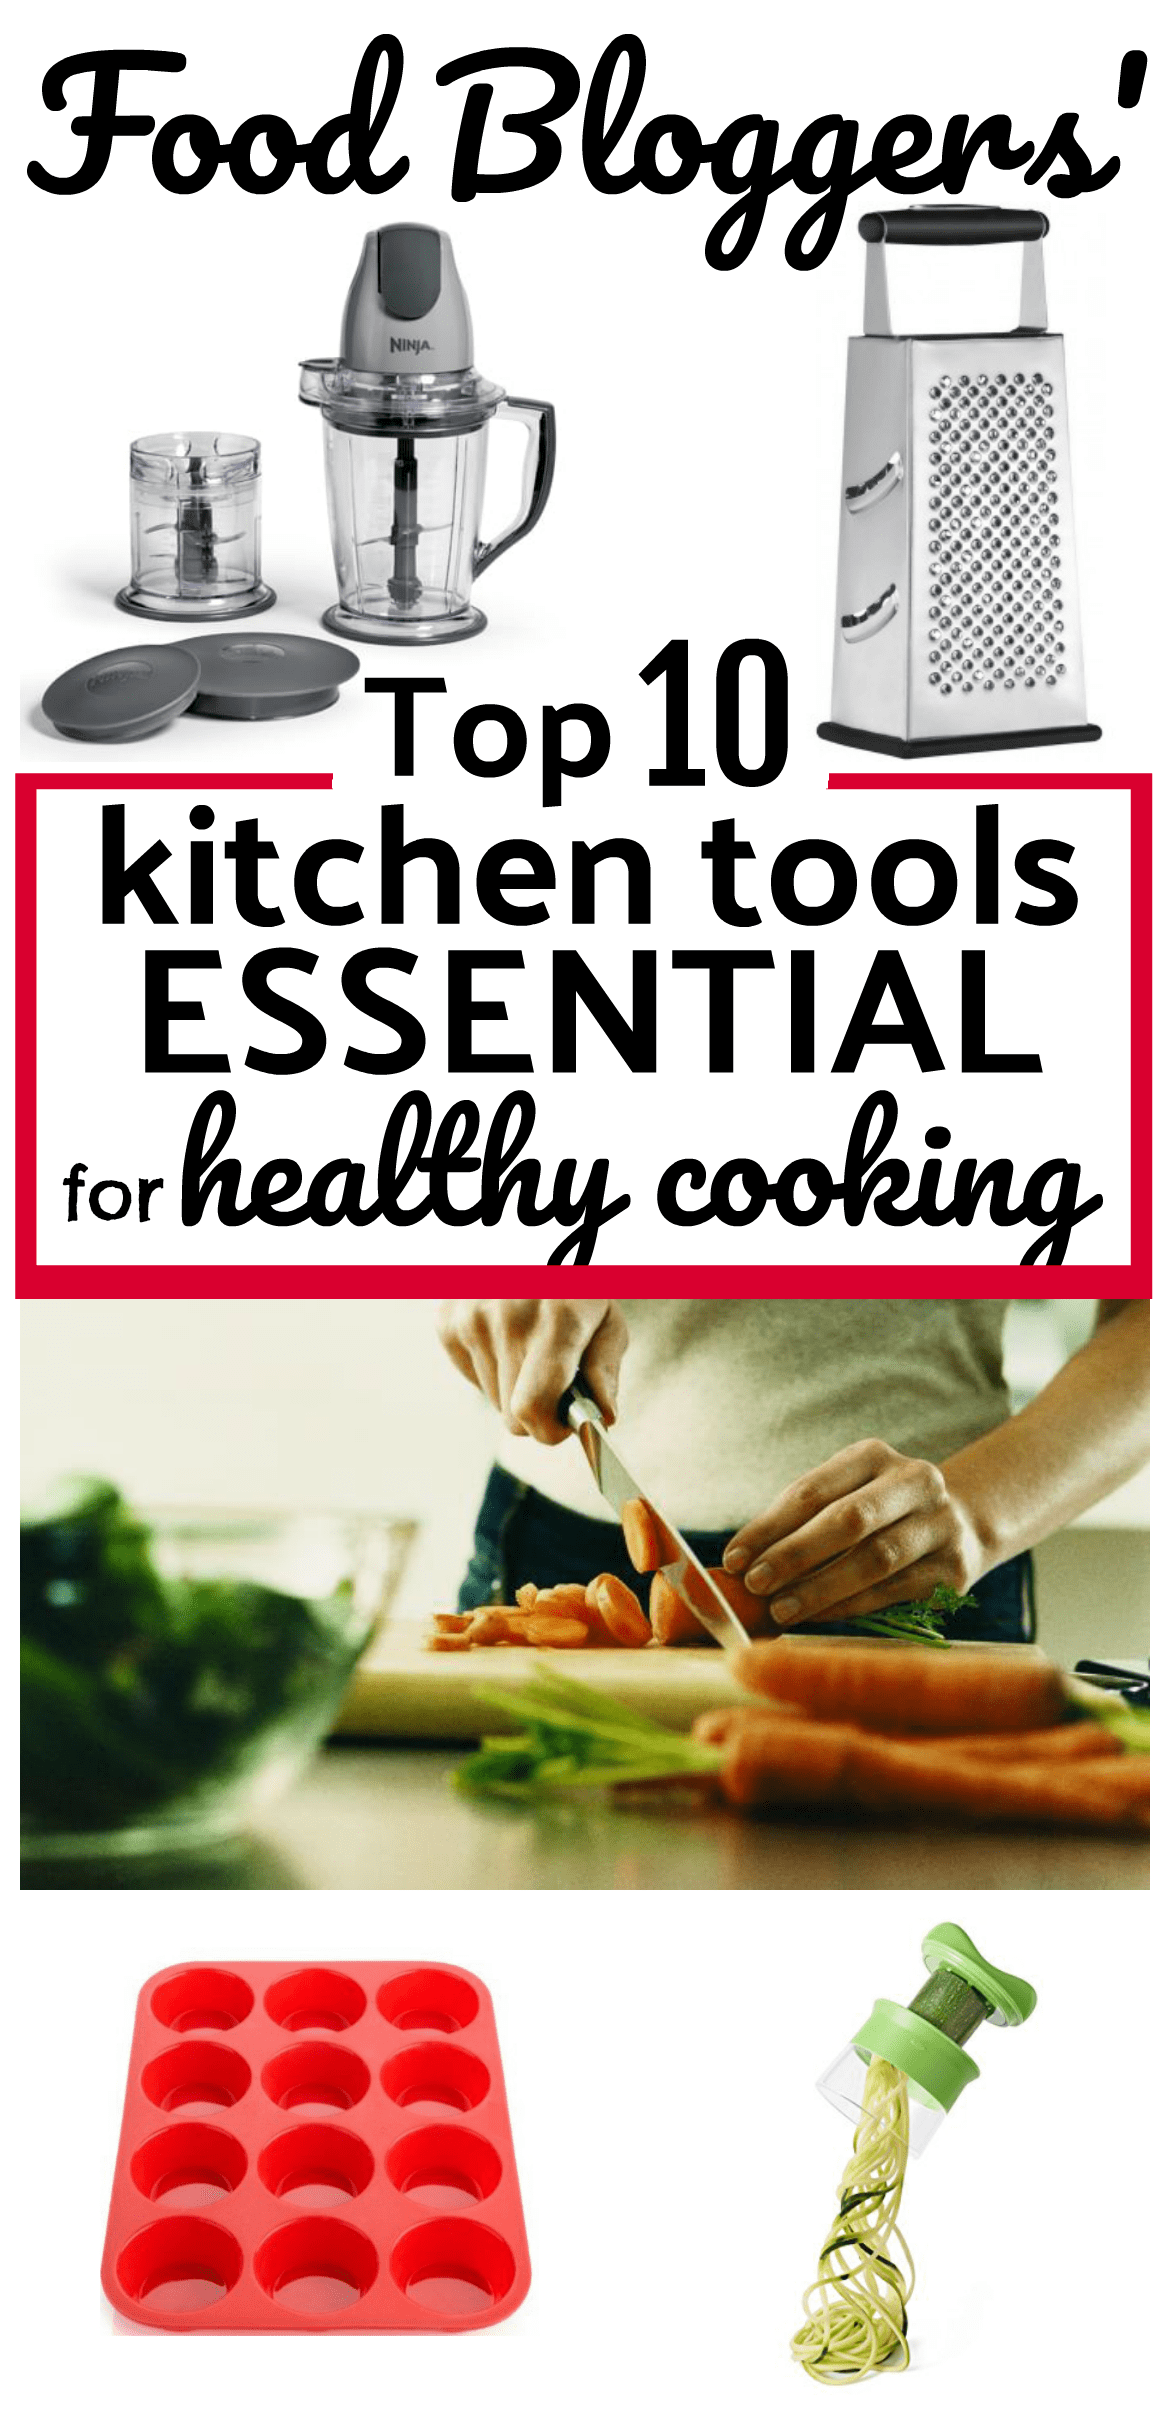 Top 10 Kitchen Tools Essential for Healthy Cooking